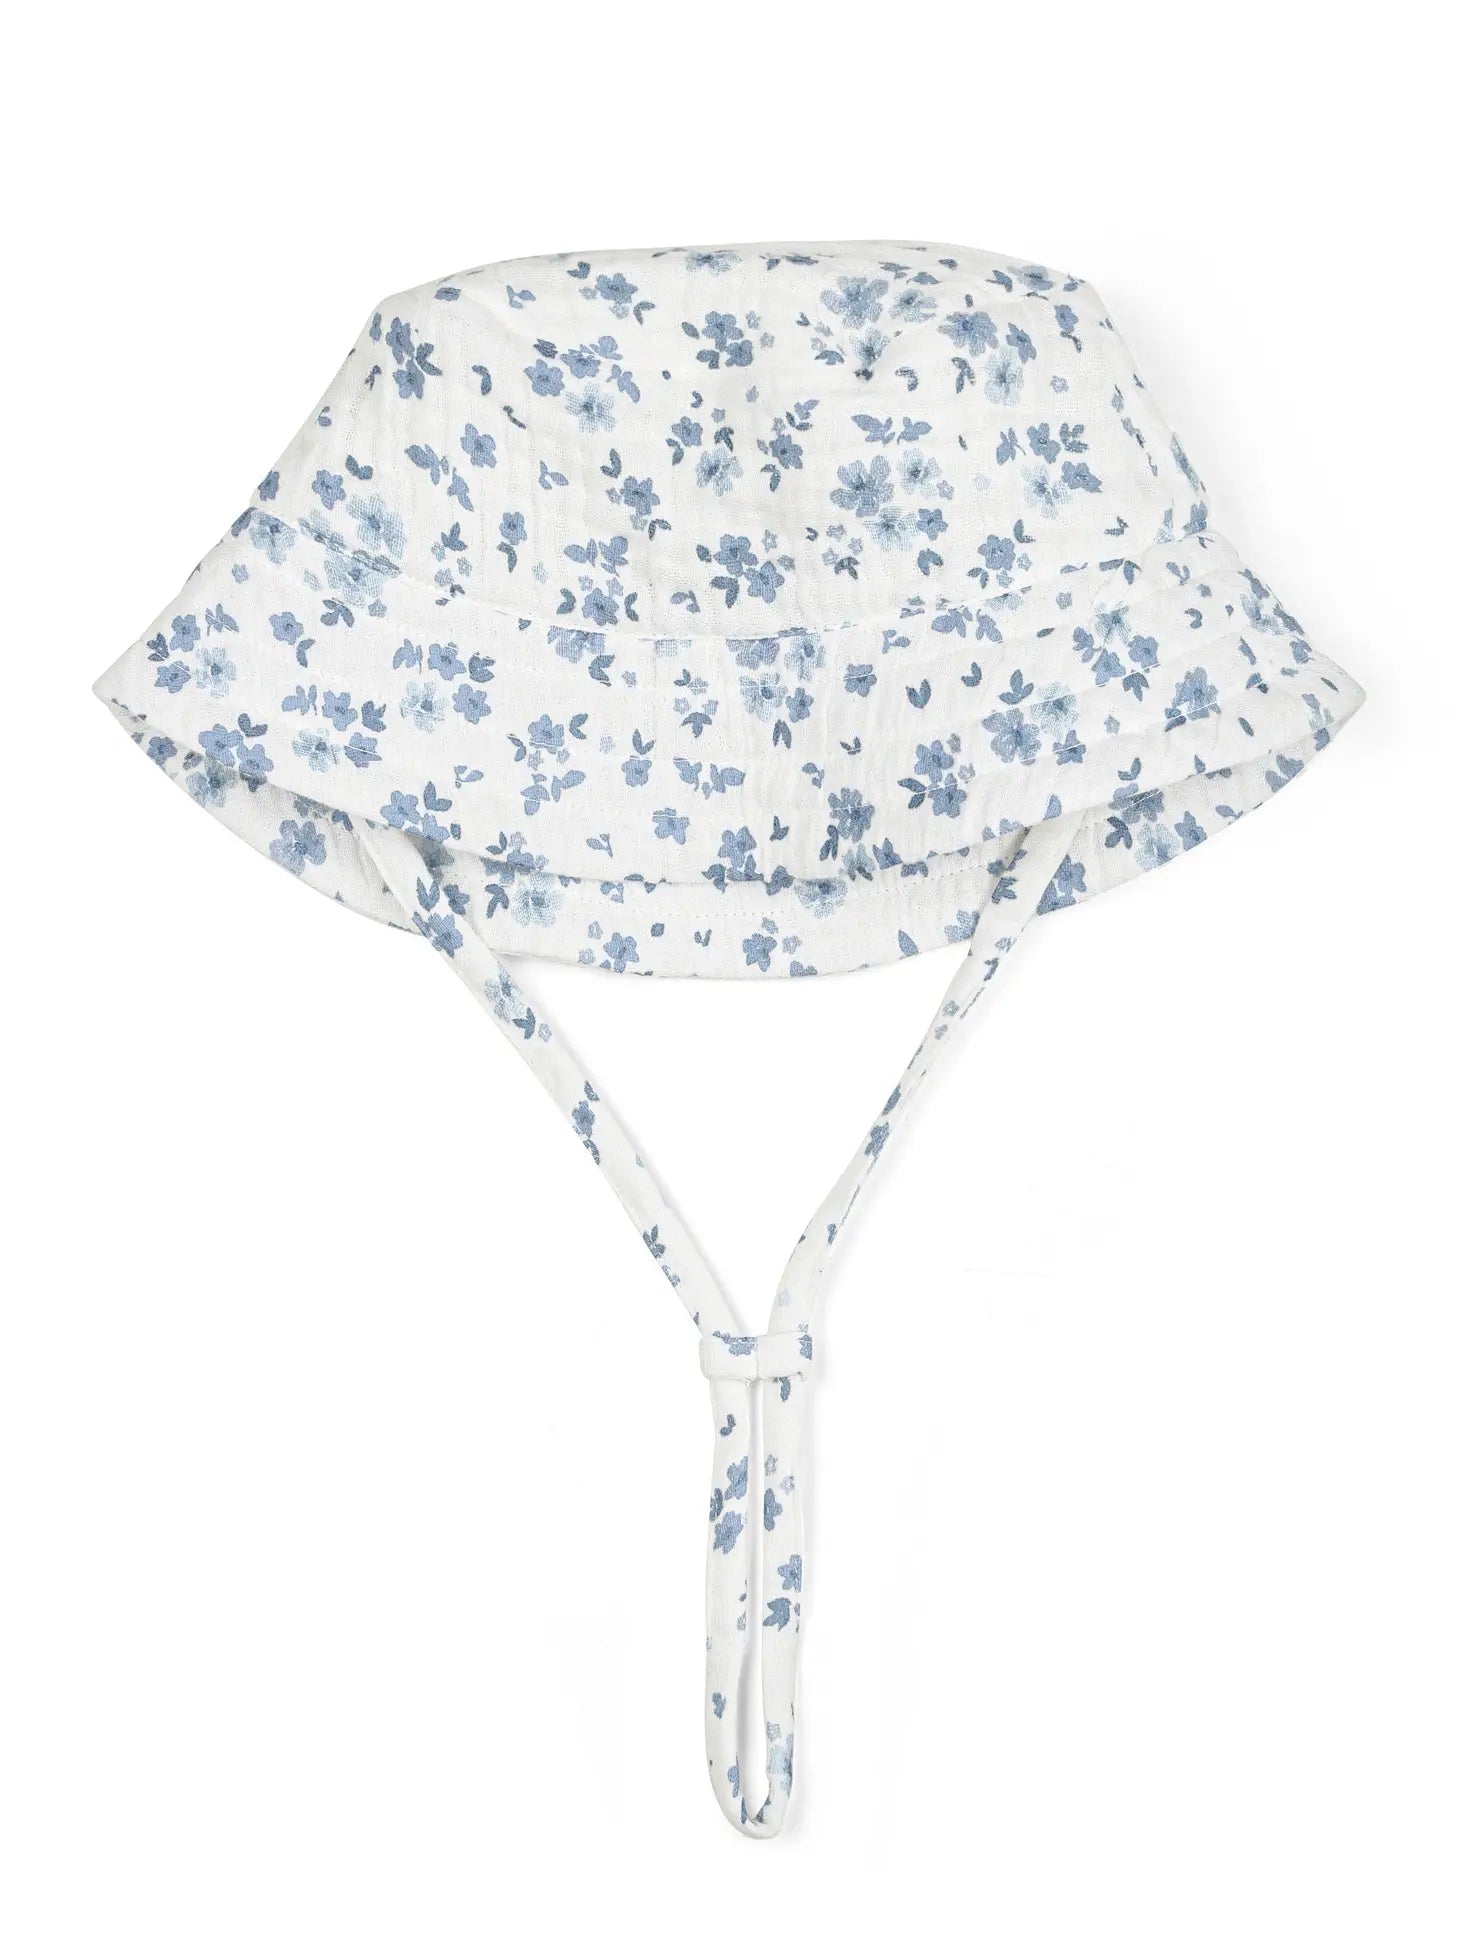 makemake periwinkle sunhat floral